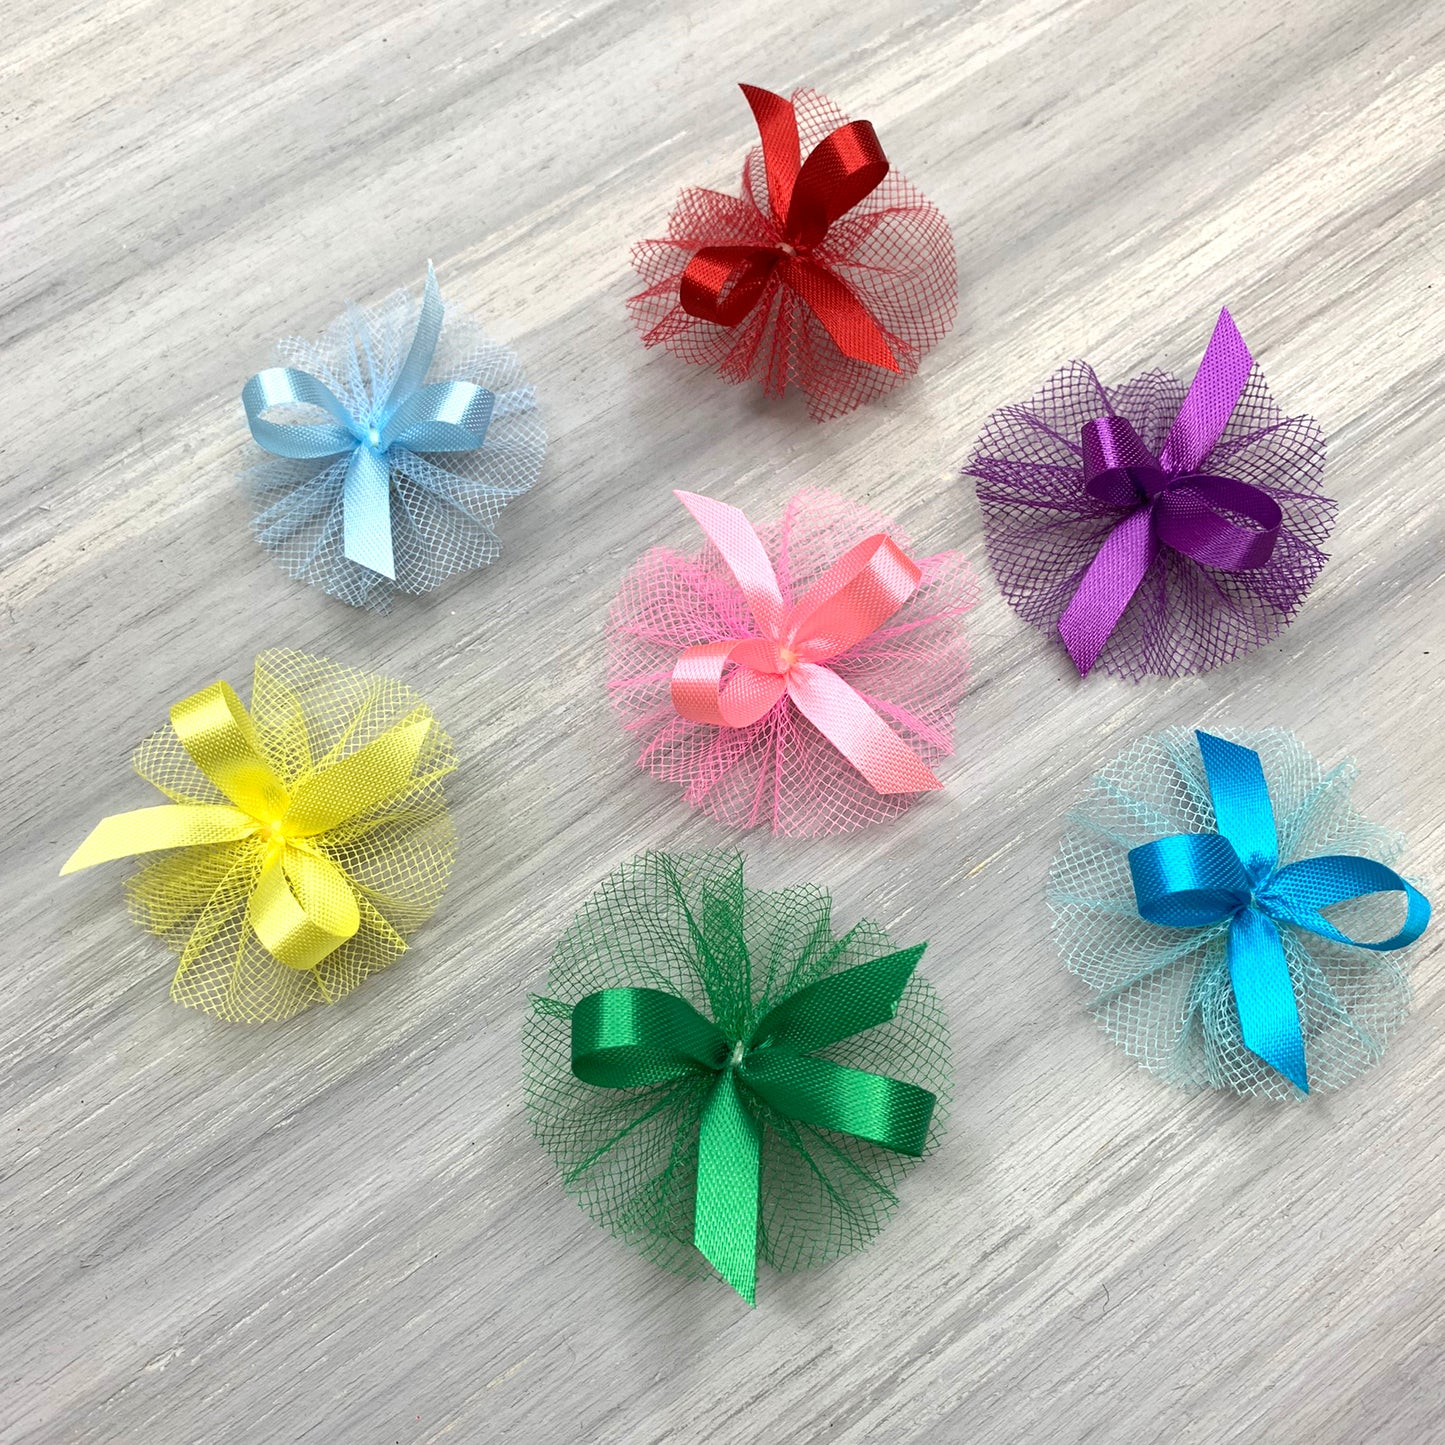 Basic Collection - 7/16 Size Bows - 14 Colors - 50 Medium Bows